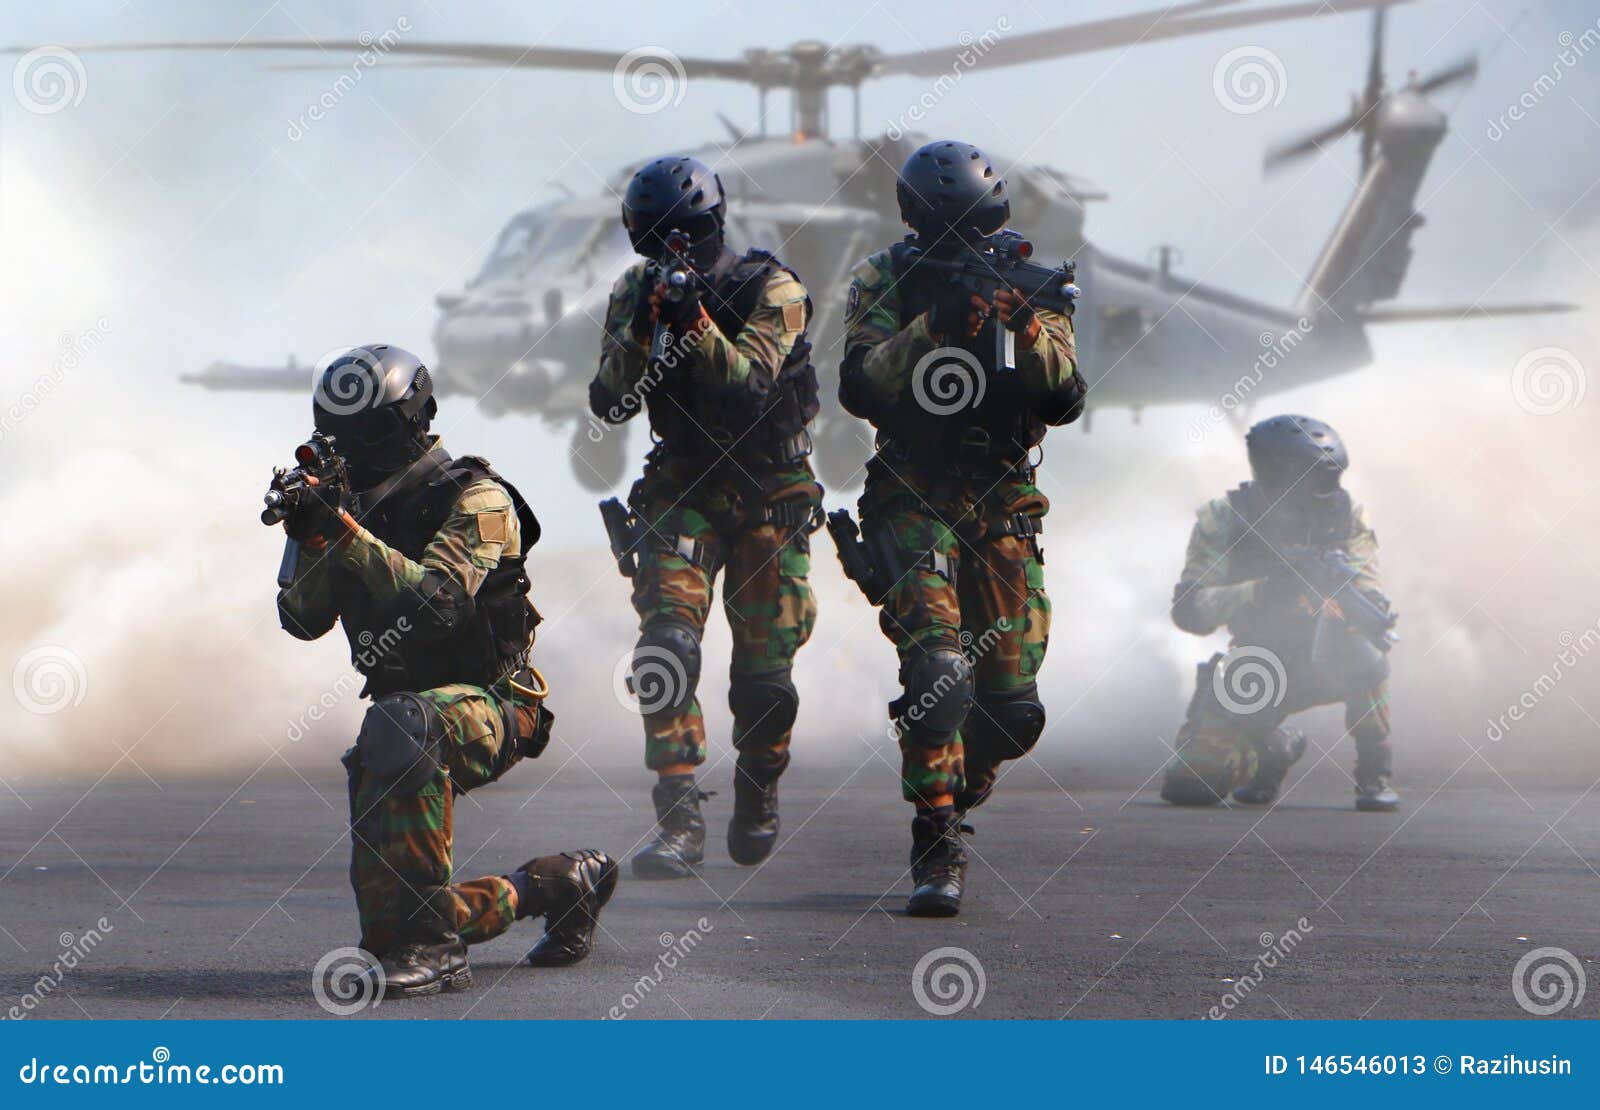 special force assault team in a mission with helicopter